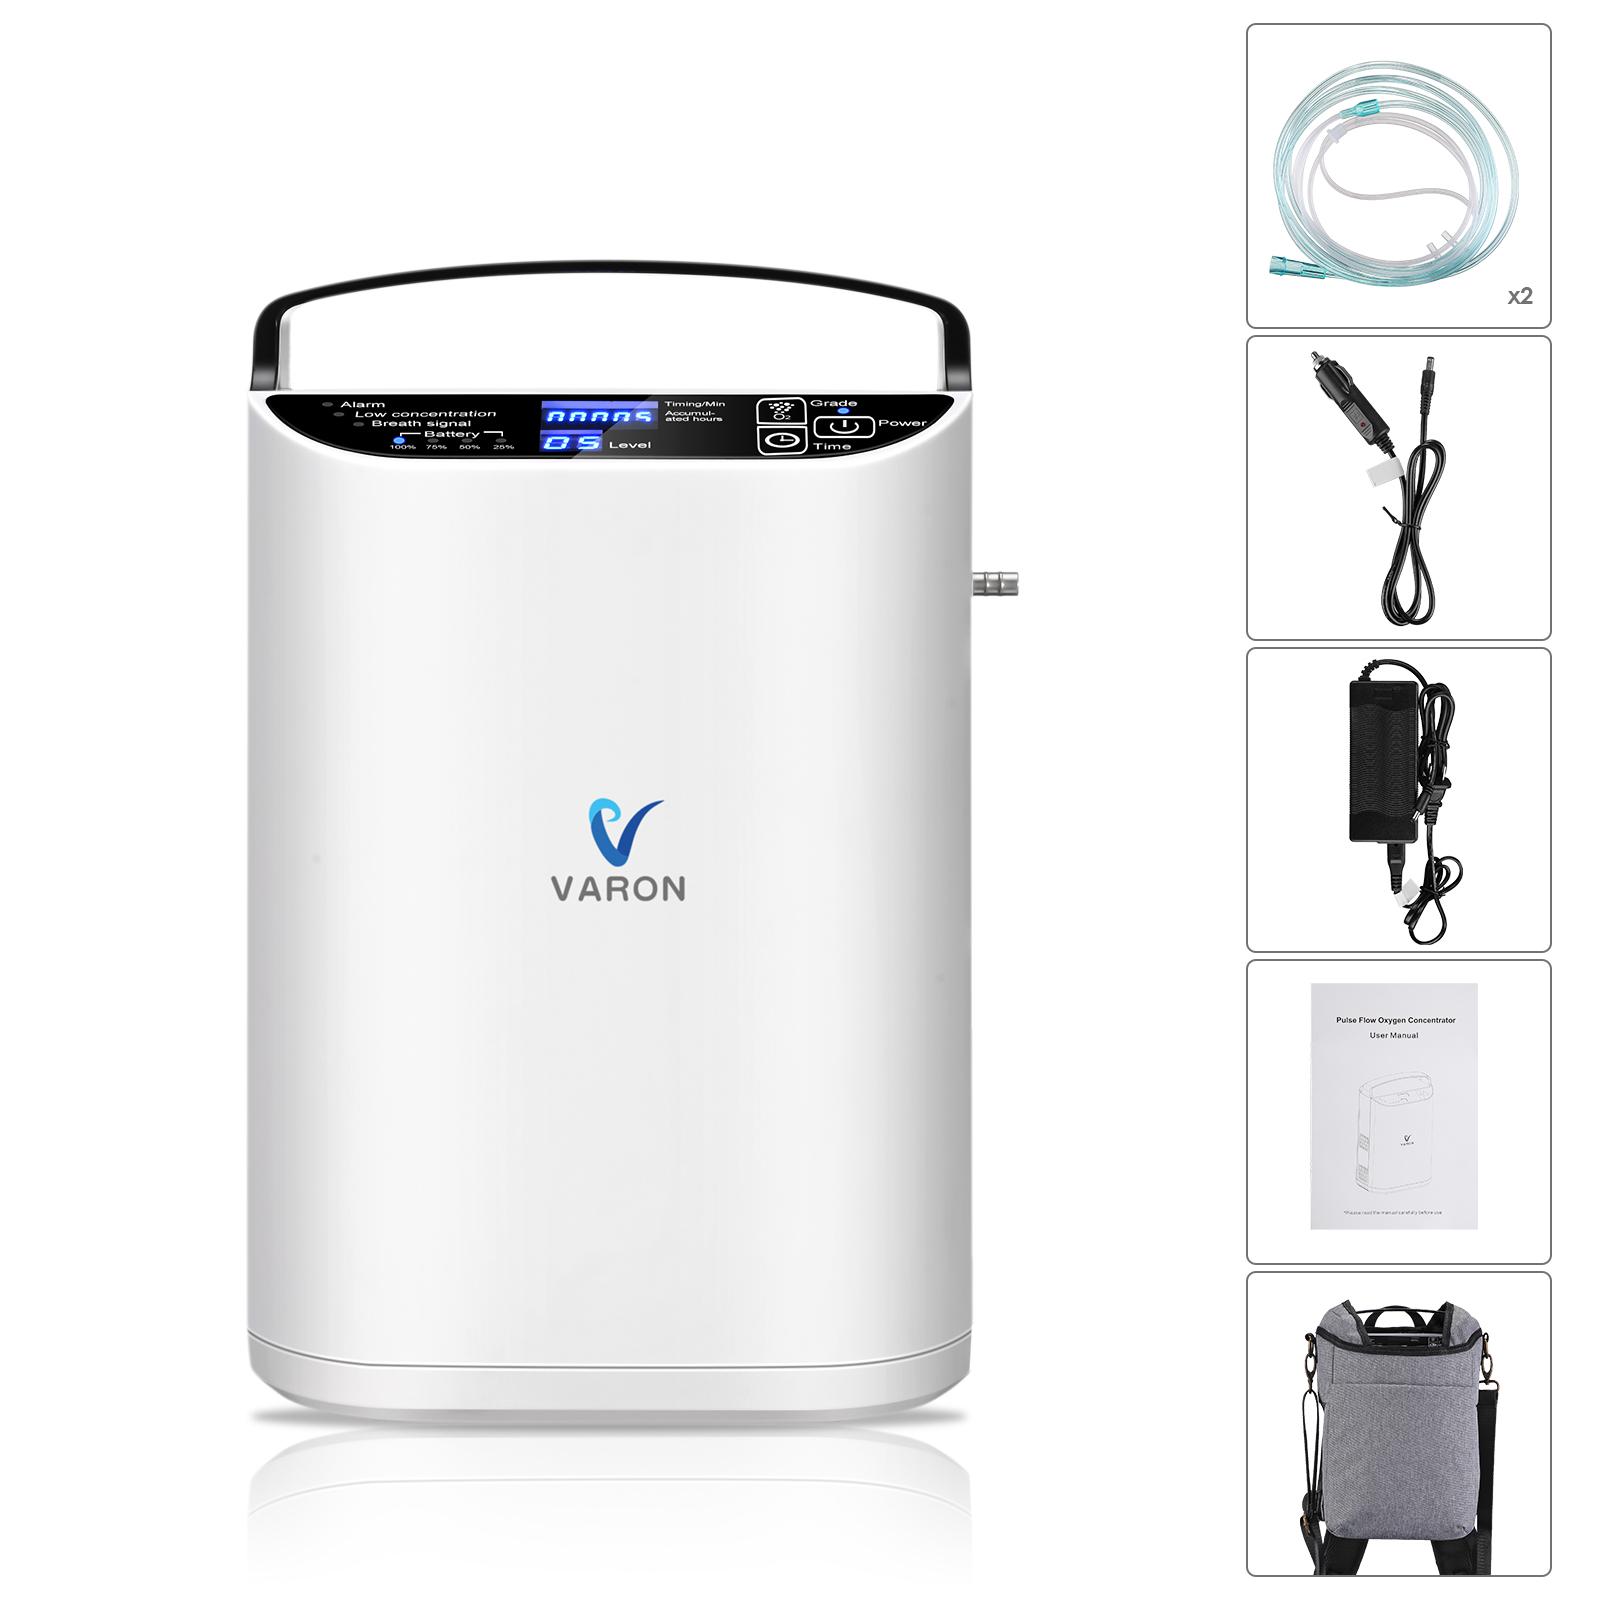 VARON Portable 5L Oxygen Concentrator 93% High concentration Oxygent Concentrator Oxygene Making Machine for Home and Travel